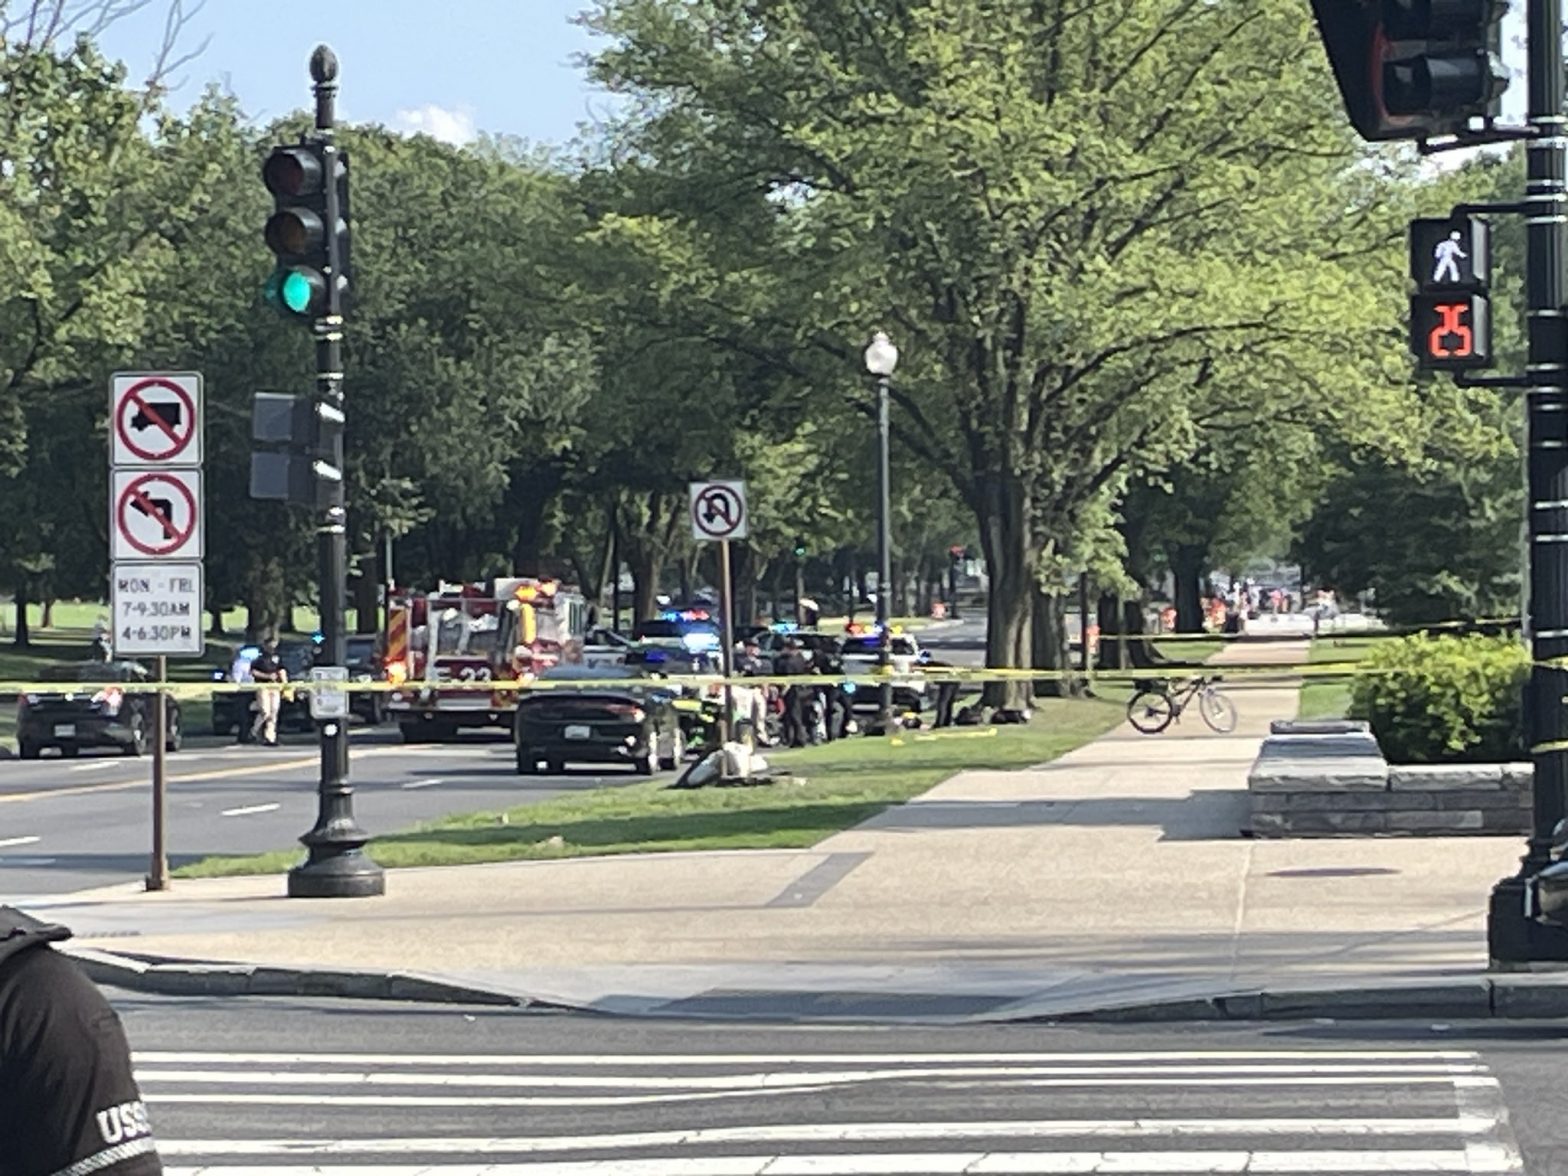 Washington DC hit and run: One person dead after driver runs red light trying to evade Secret Service officers | Watch video